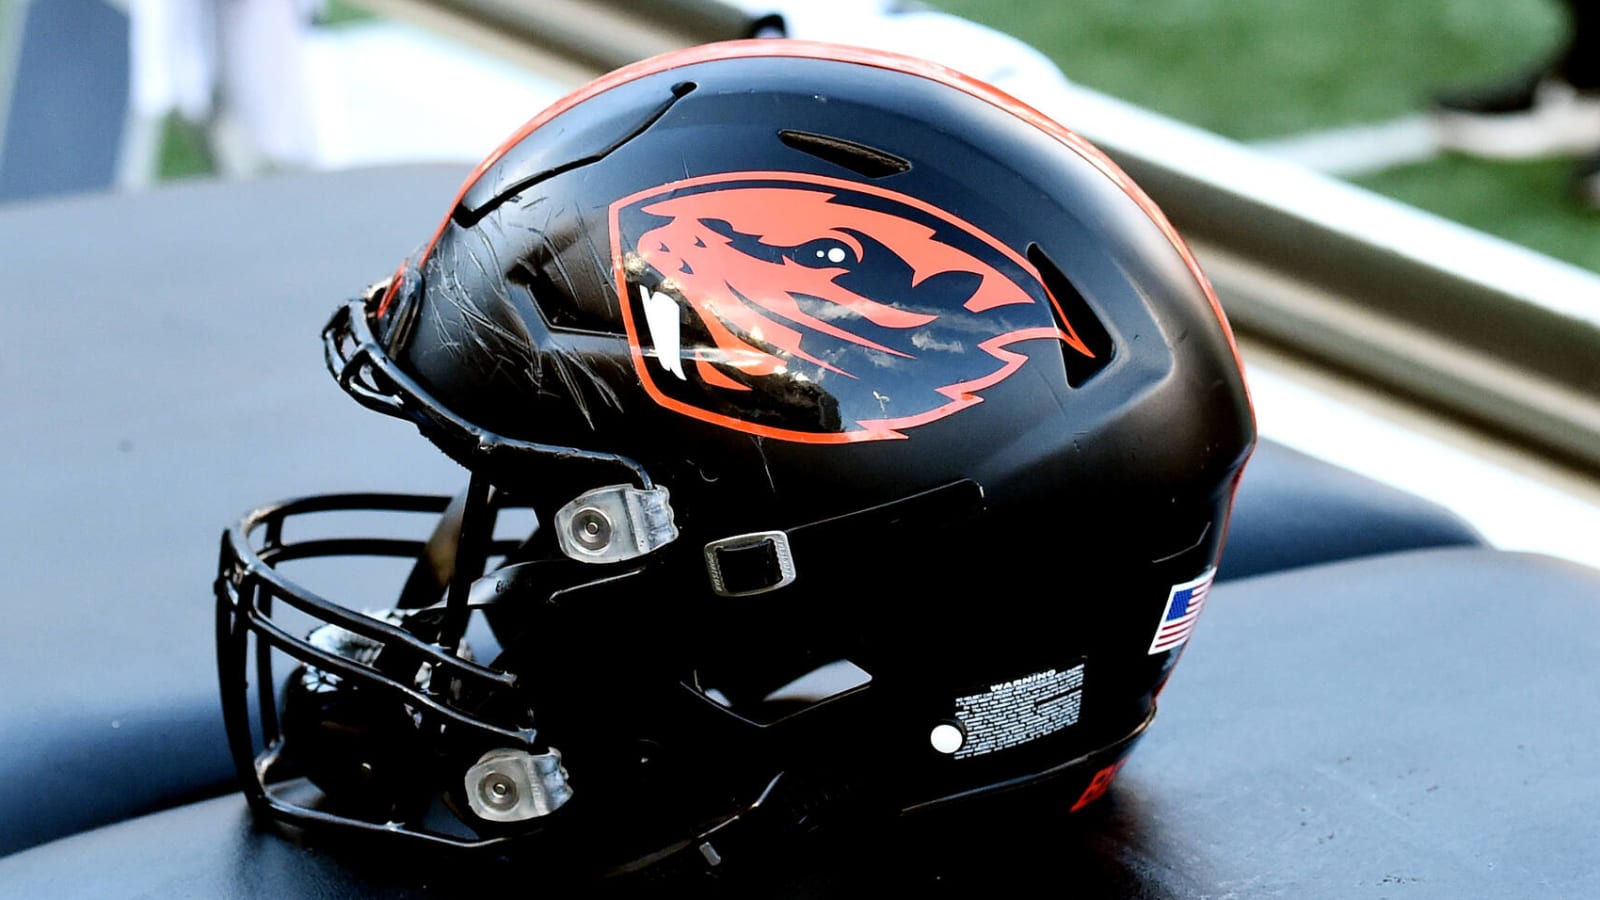 Oregon State expresses commitment to Pac-12